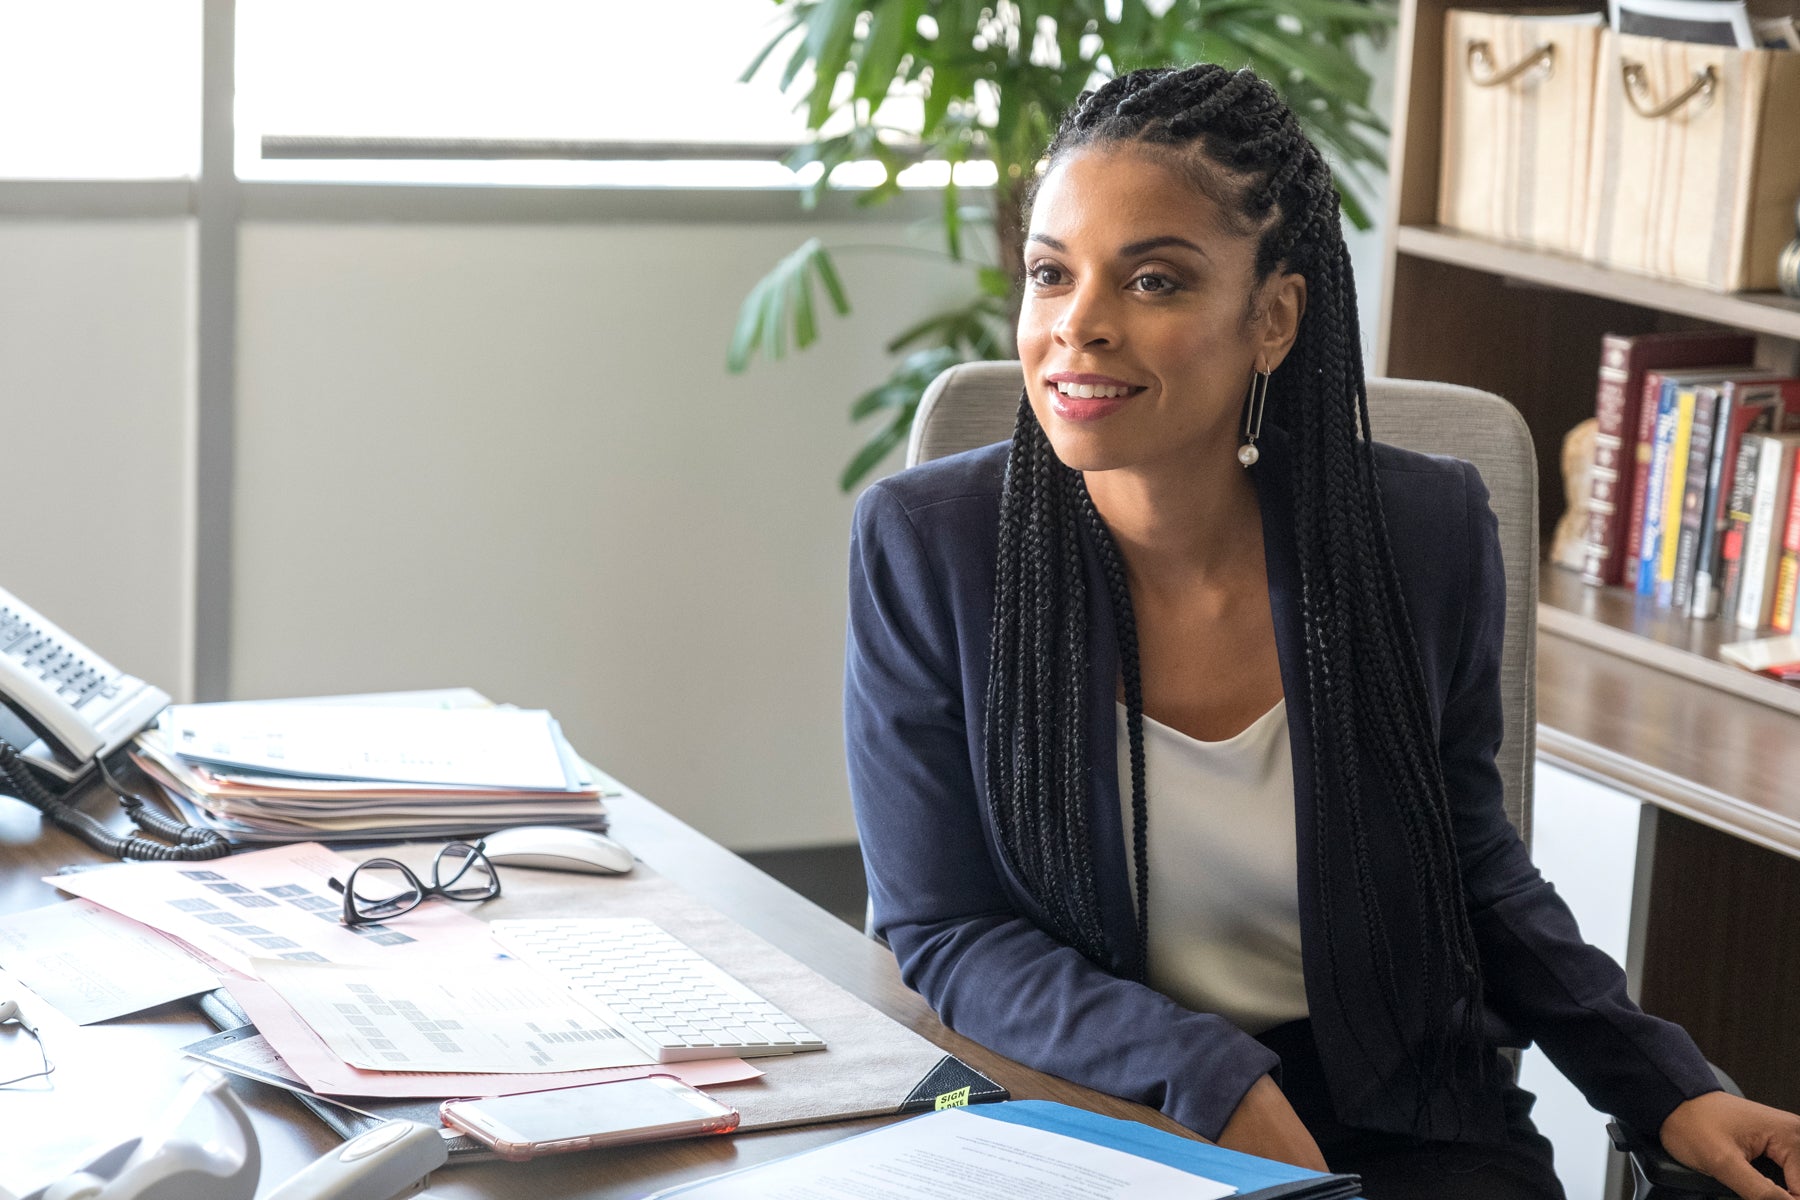 Beth Pearson (Susan Kelechi Watson) sits at an office desk covered in papers, smiling off camera in an episode of This Is Us.